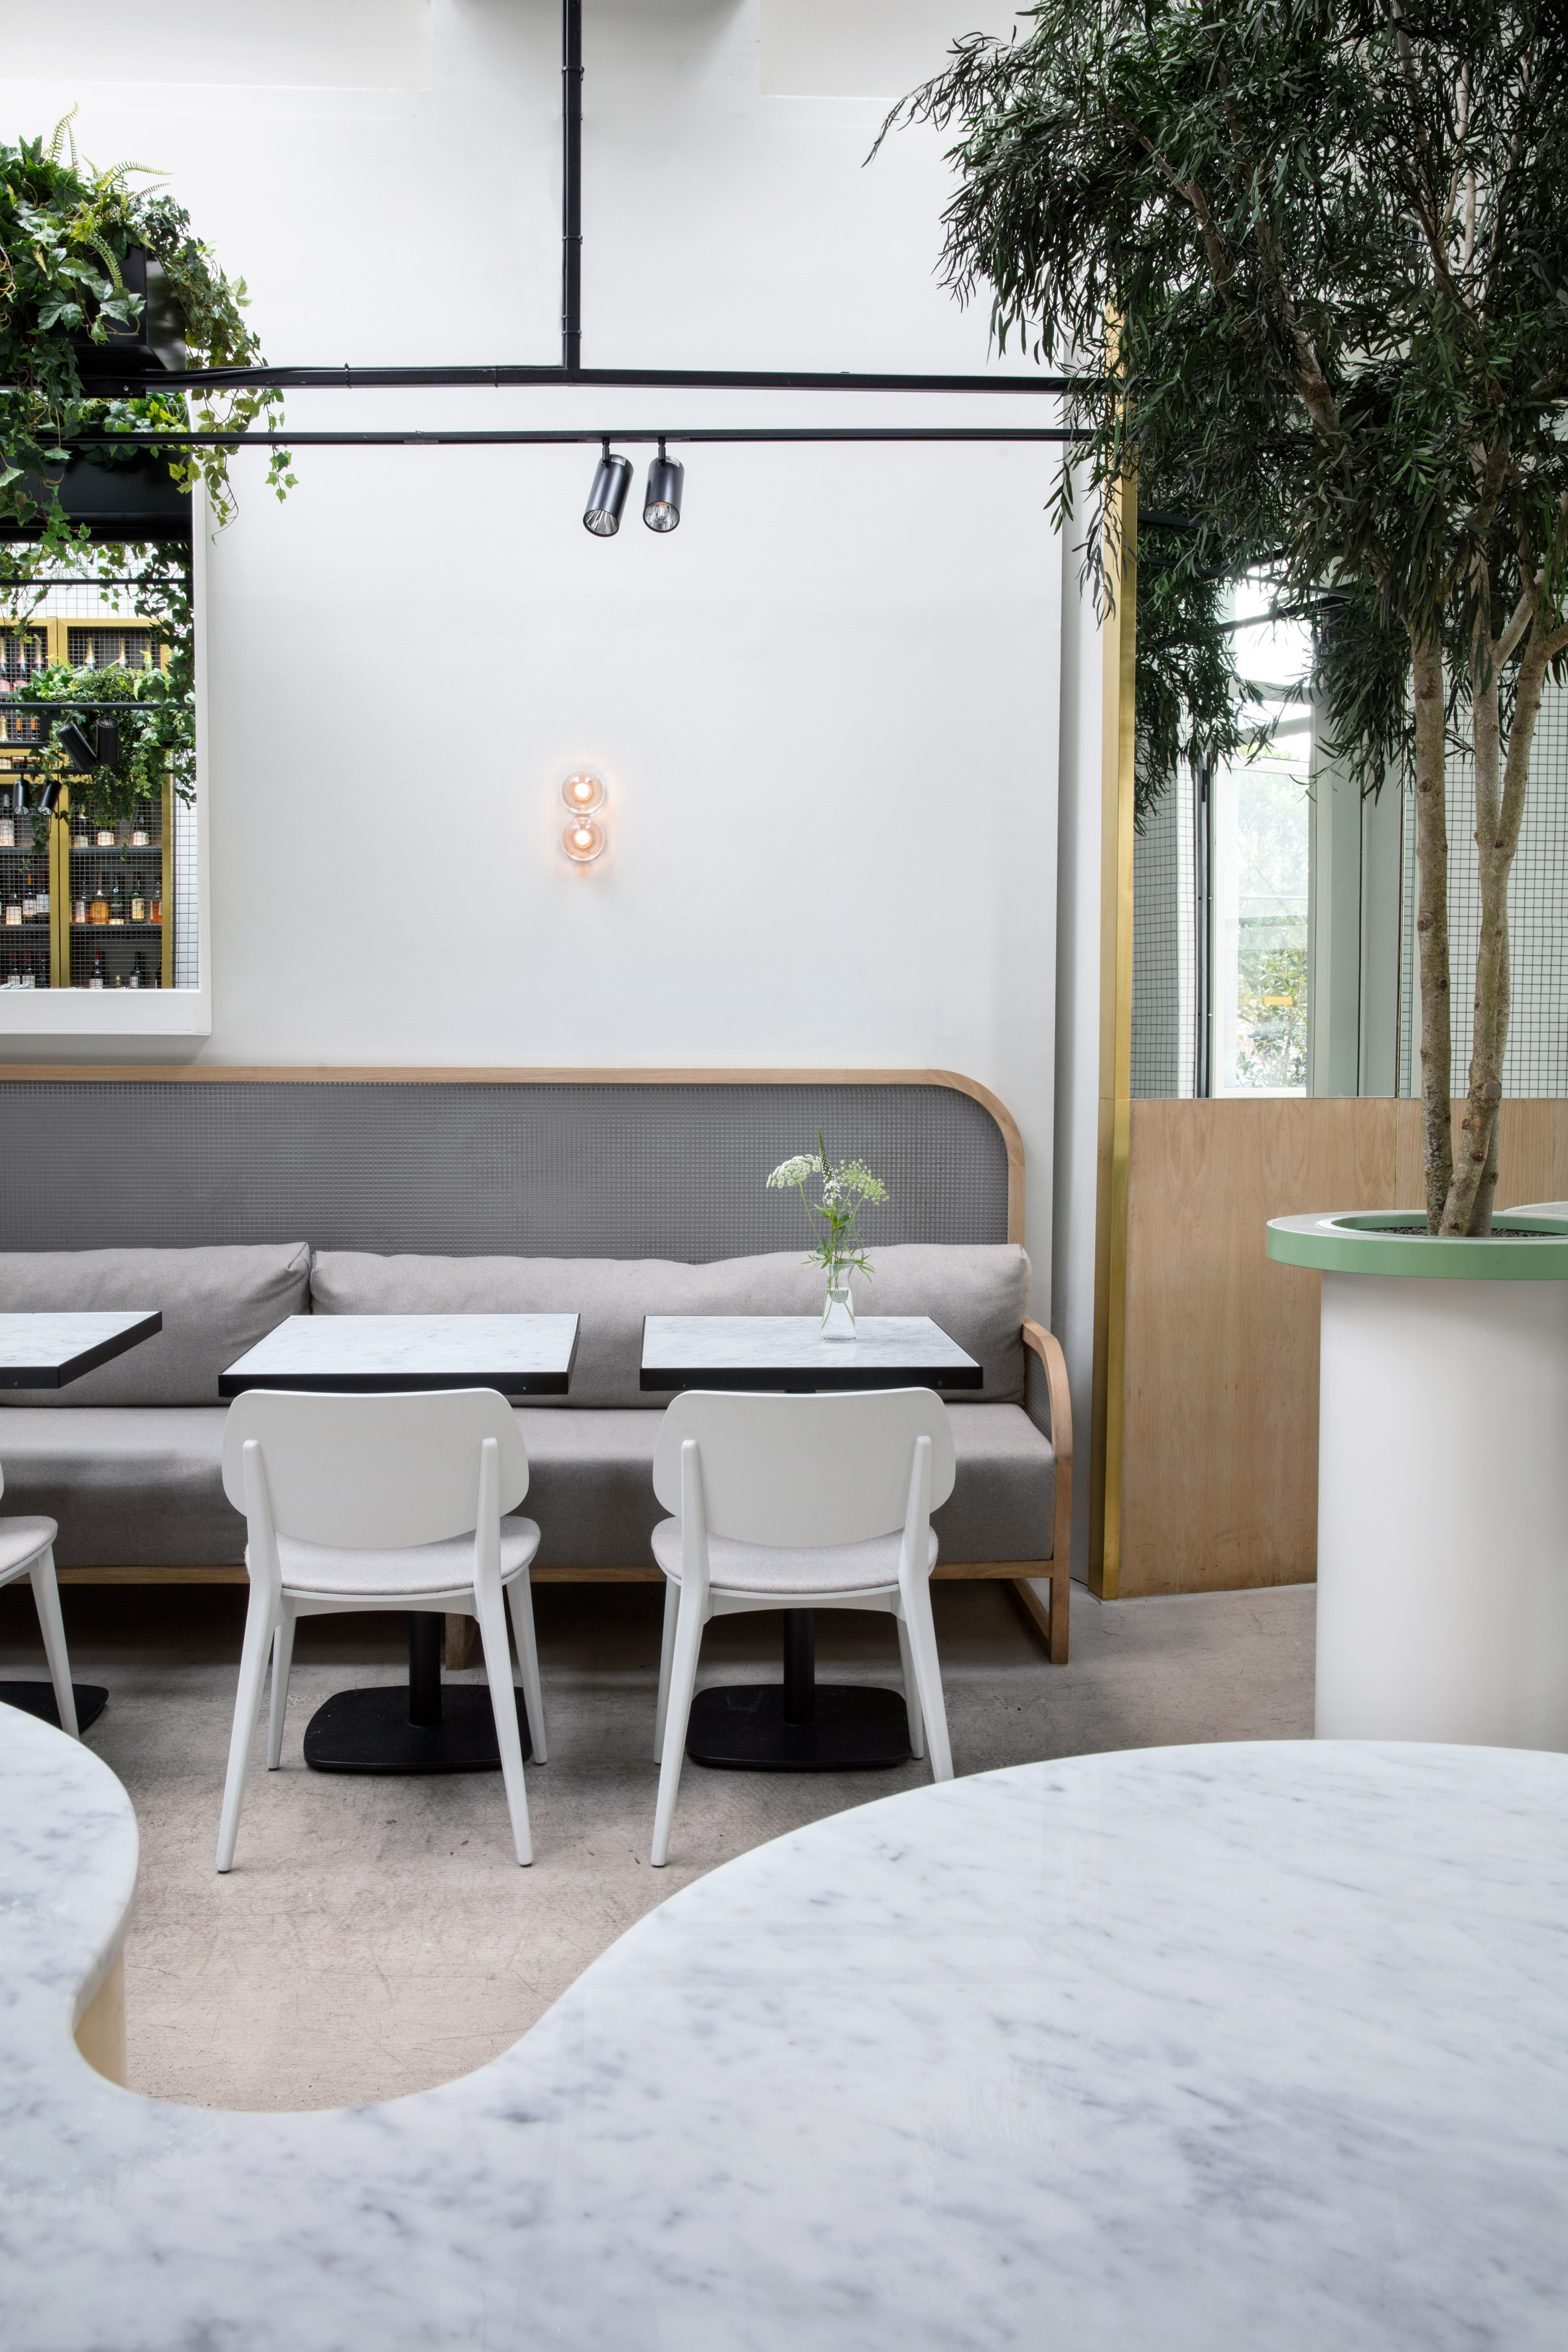 Stella Collective "brings the outside in" for seaside cafe interior-5